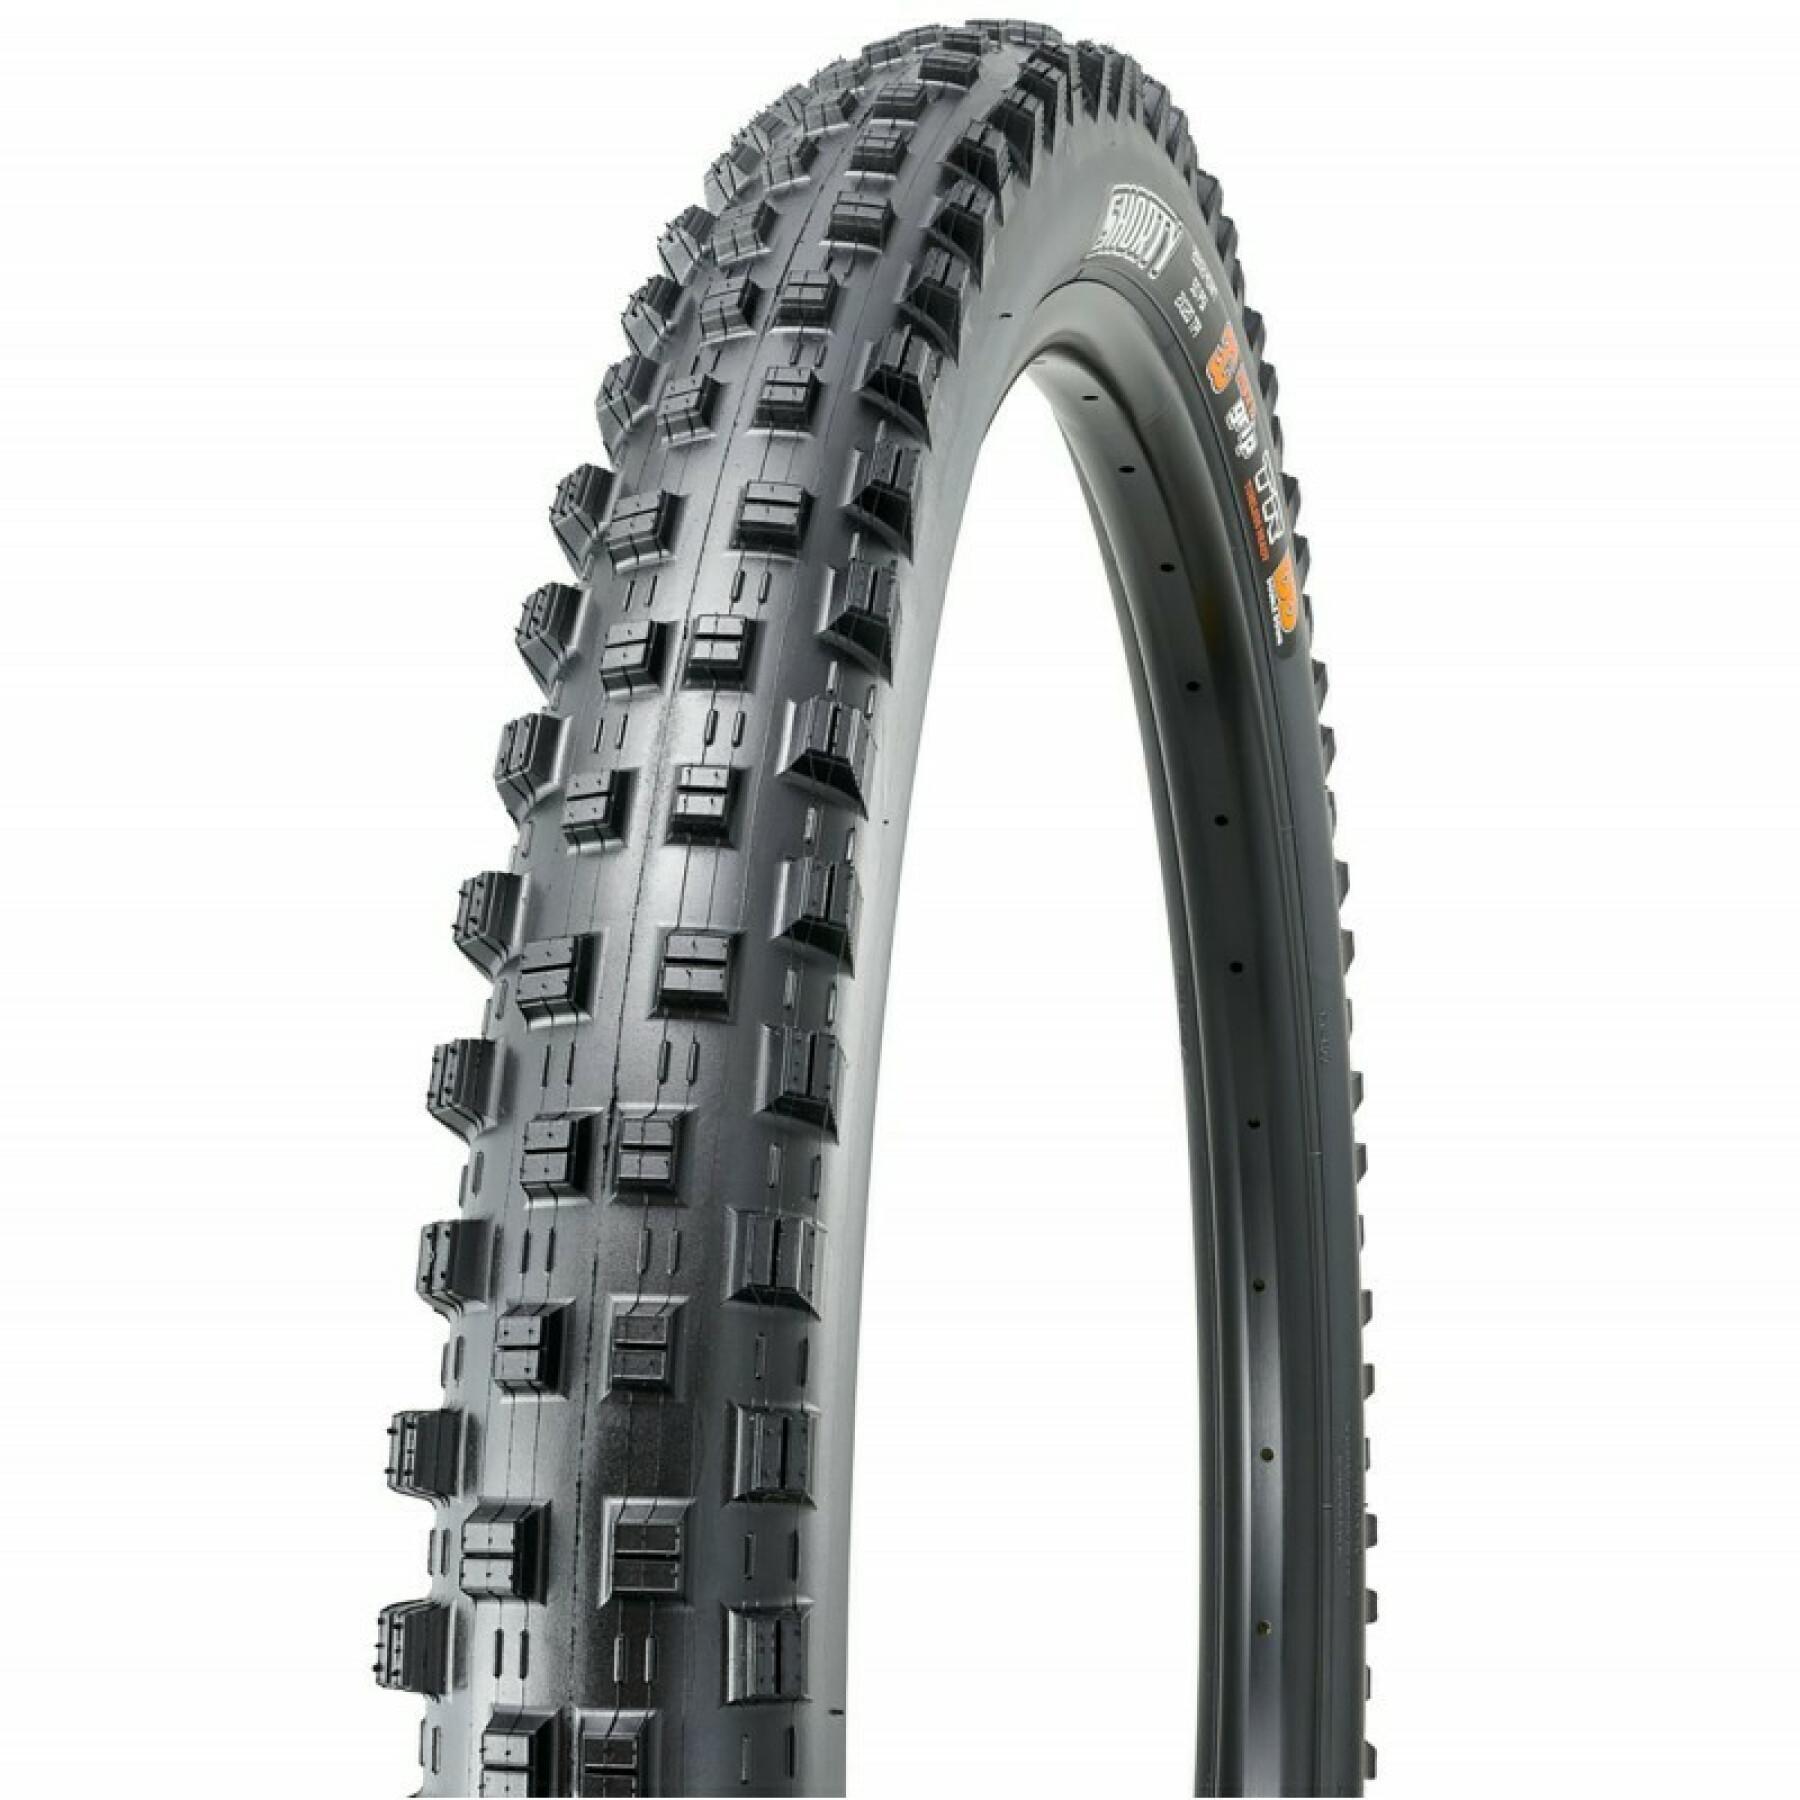 Zachte band Maxxis Shorty 27.5x2.40wt 3c Grip / Tubeless Ready / Double Down